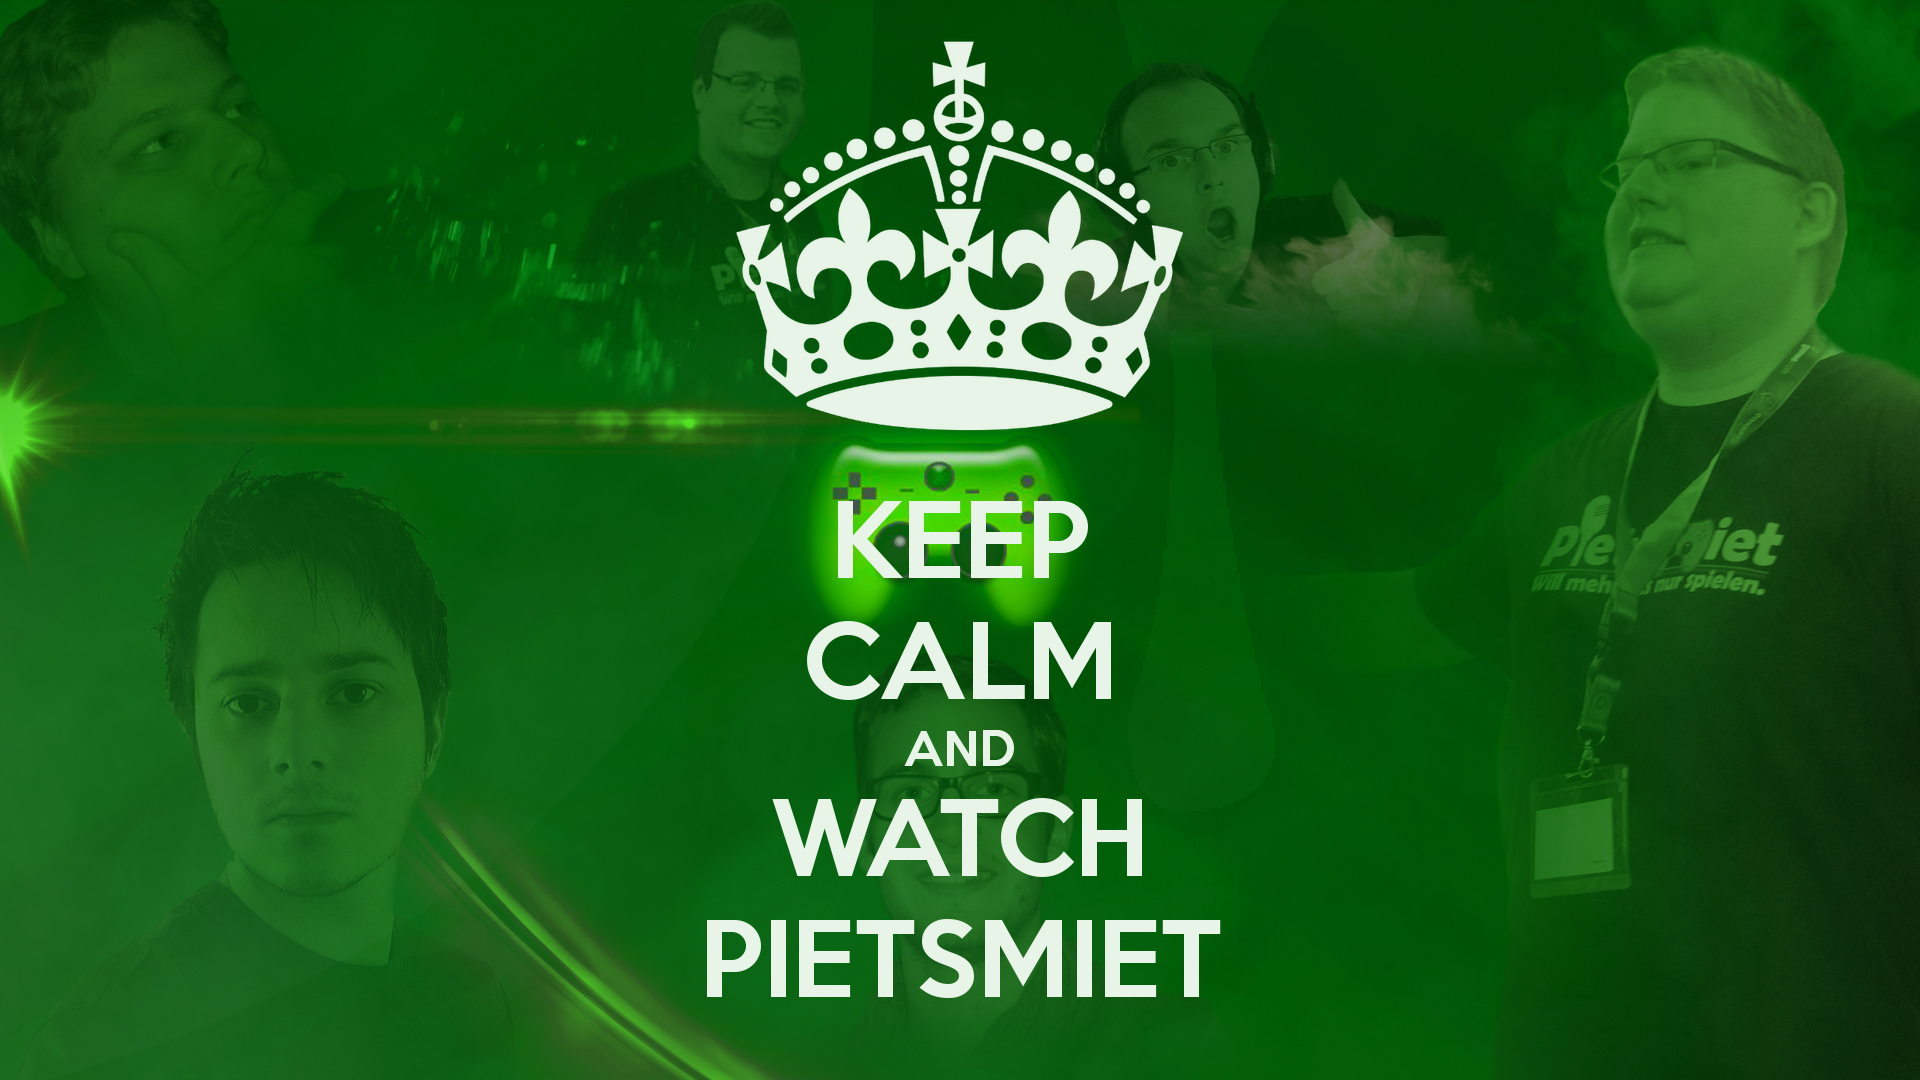 General 1920x1080 Keep Calm and... green background men